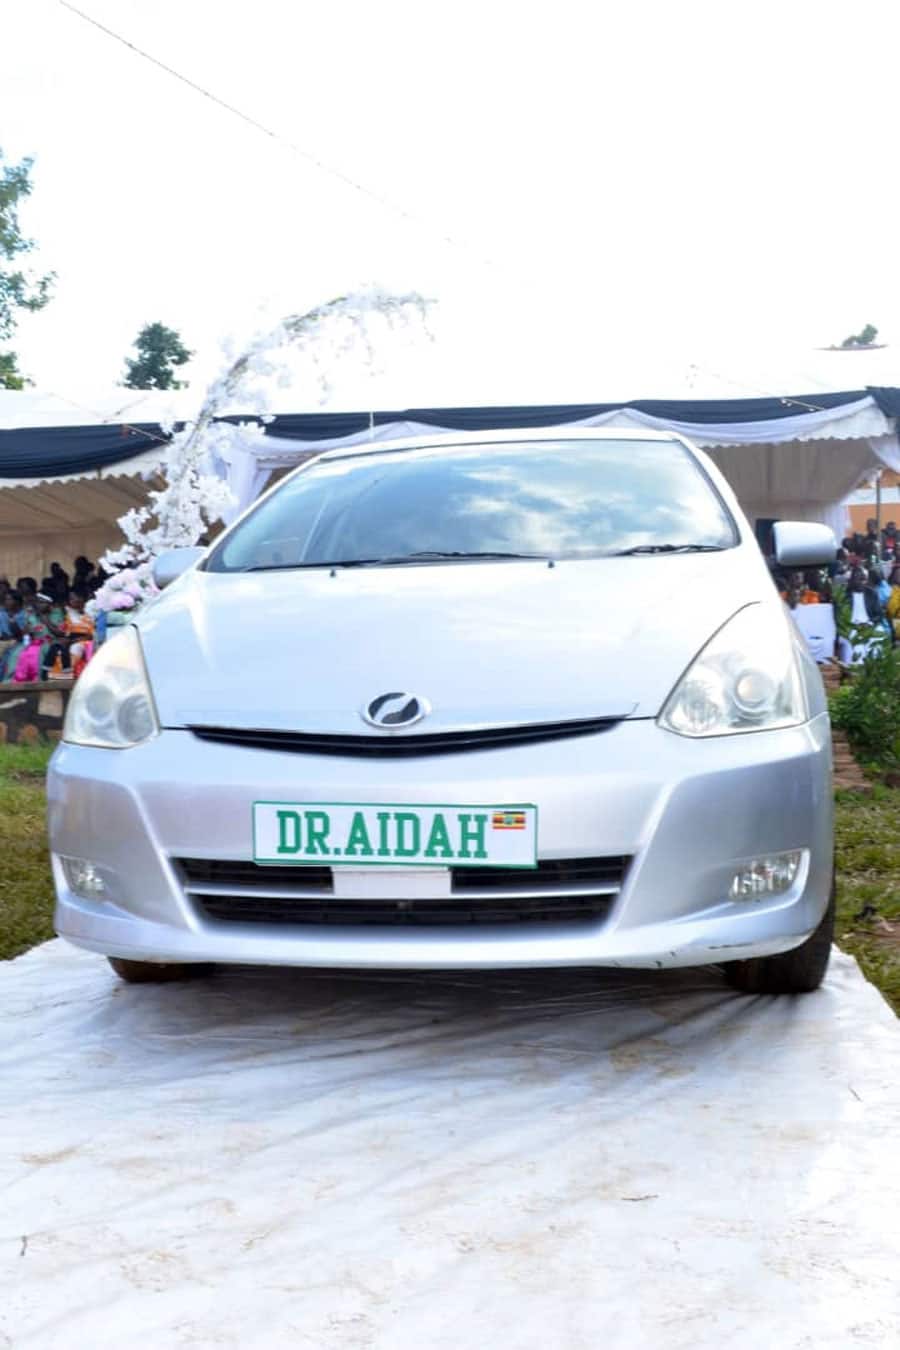 Dad gifts daughter brand new car in ceremony attended by over 5k guests